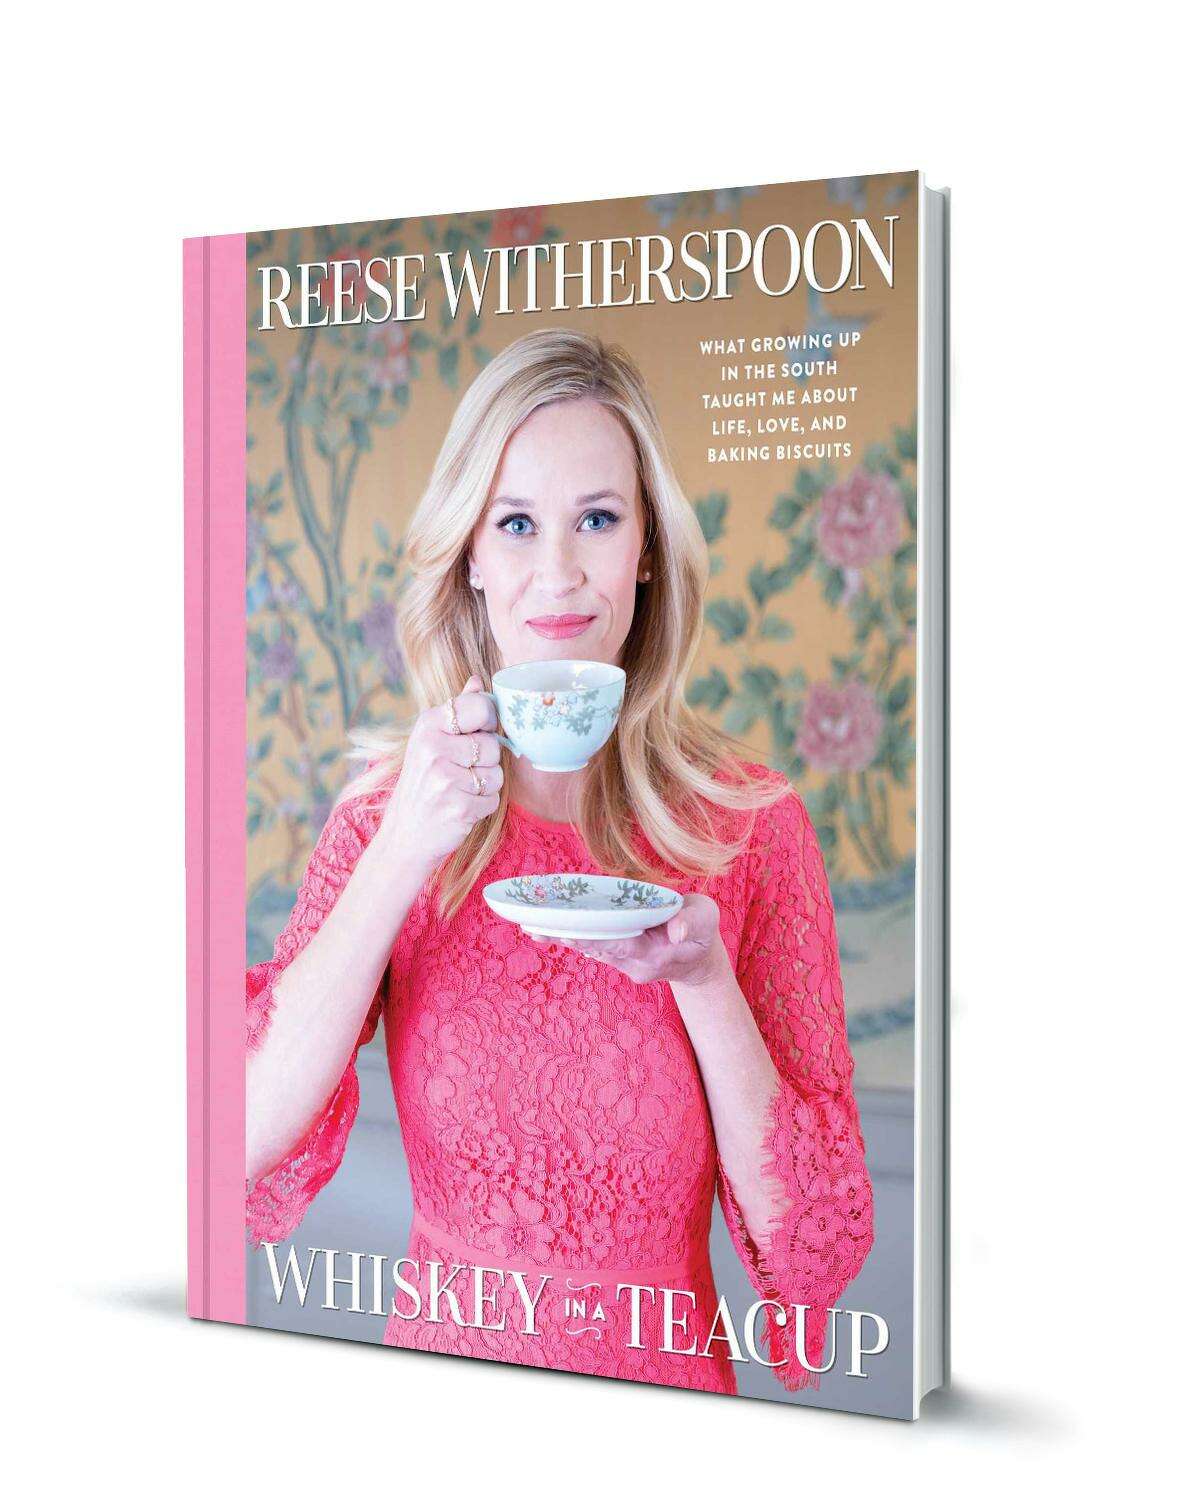 wild reese witherspoon book